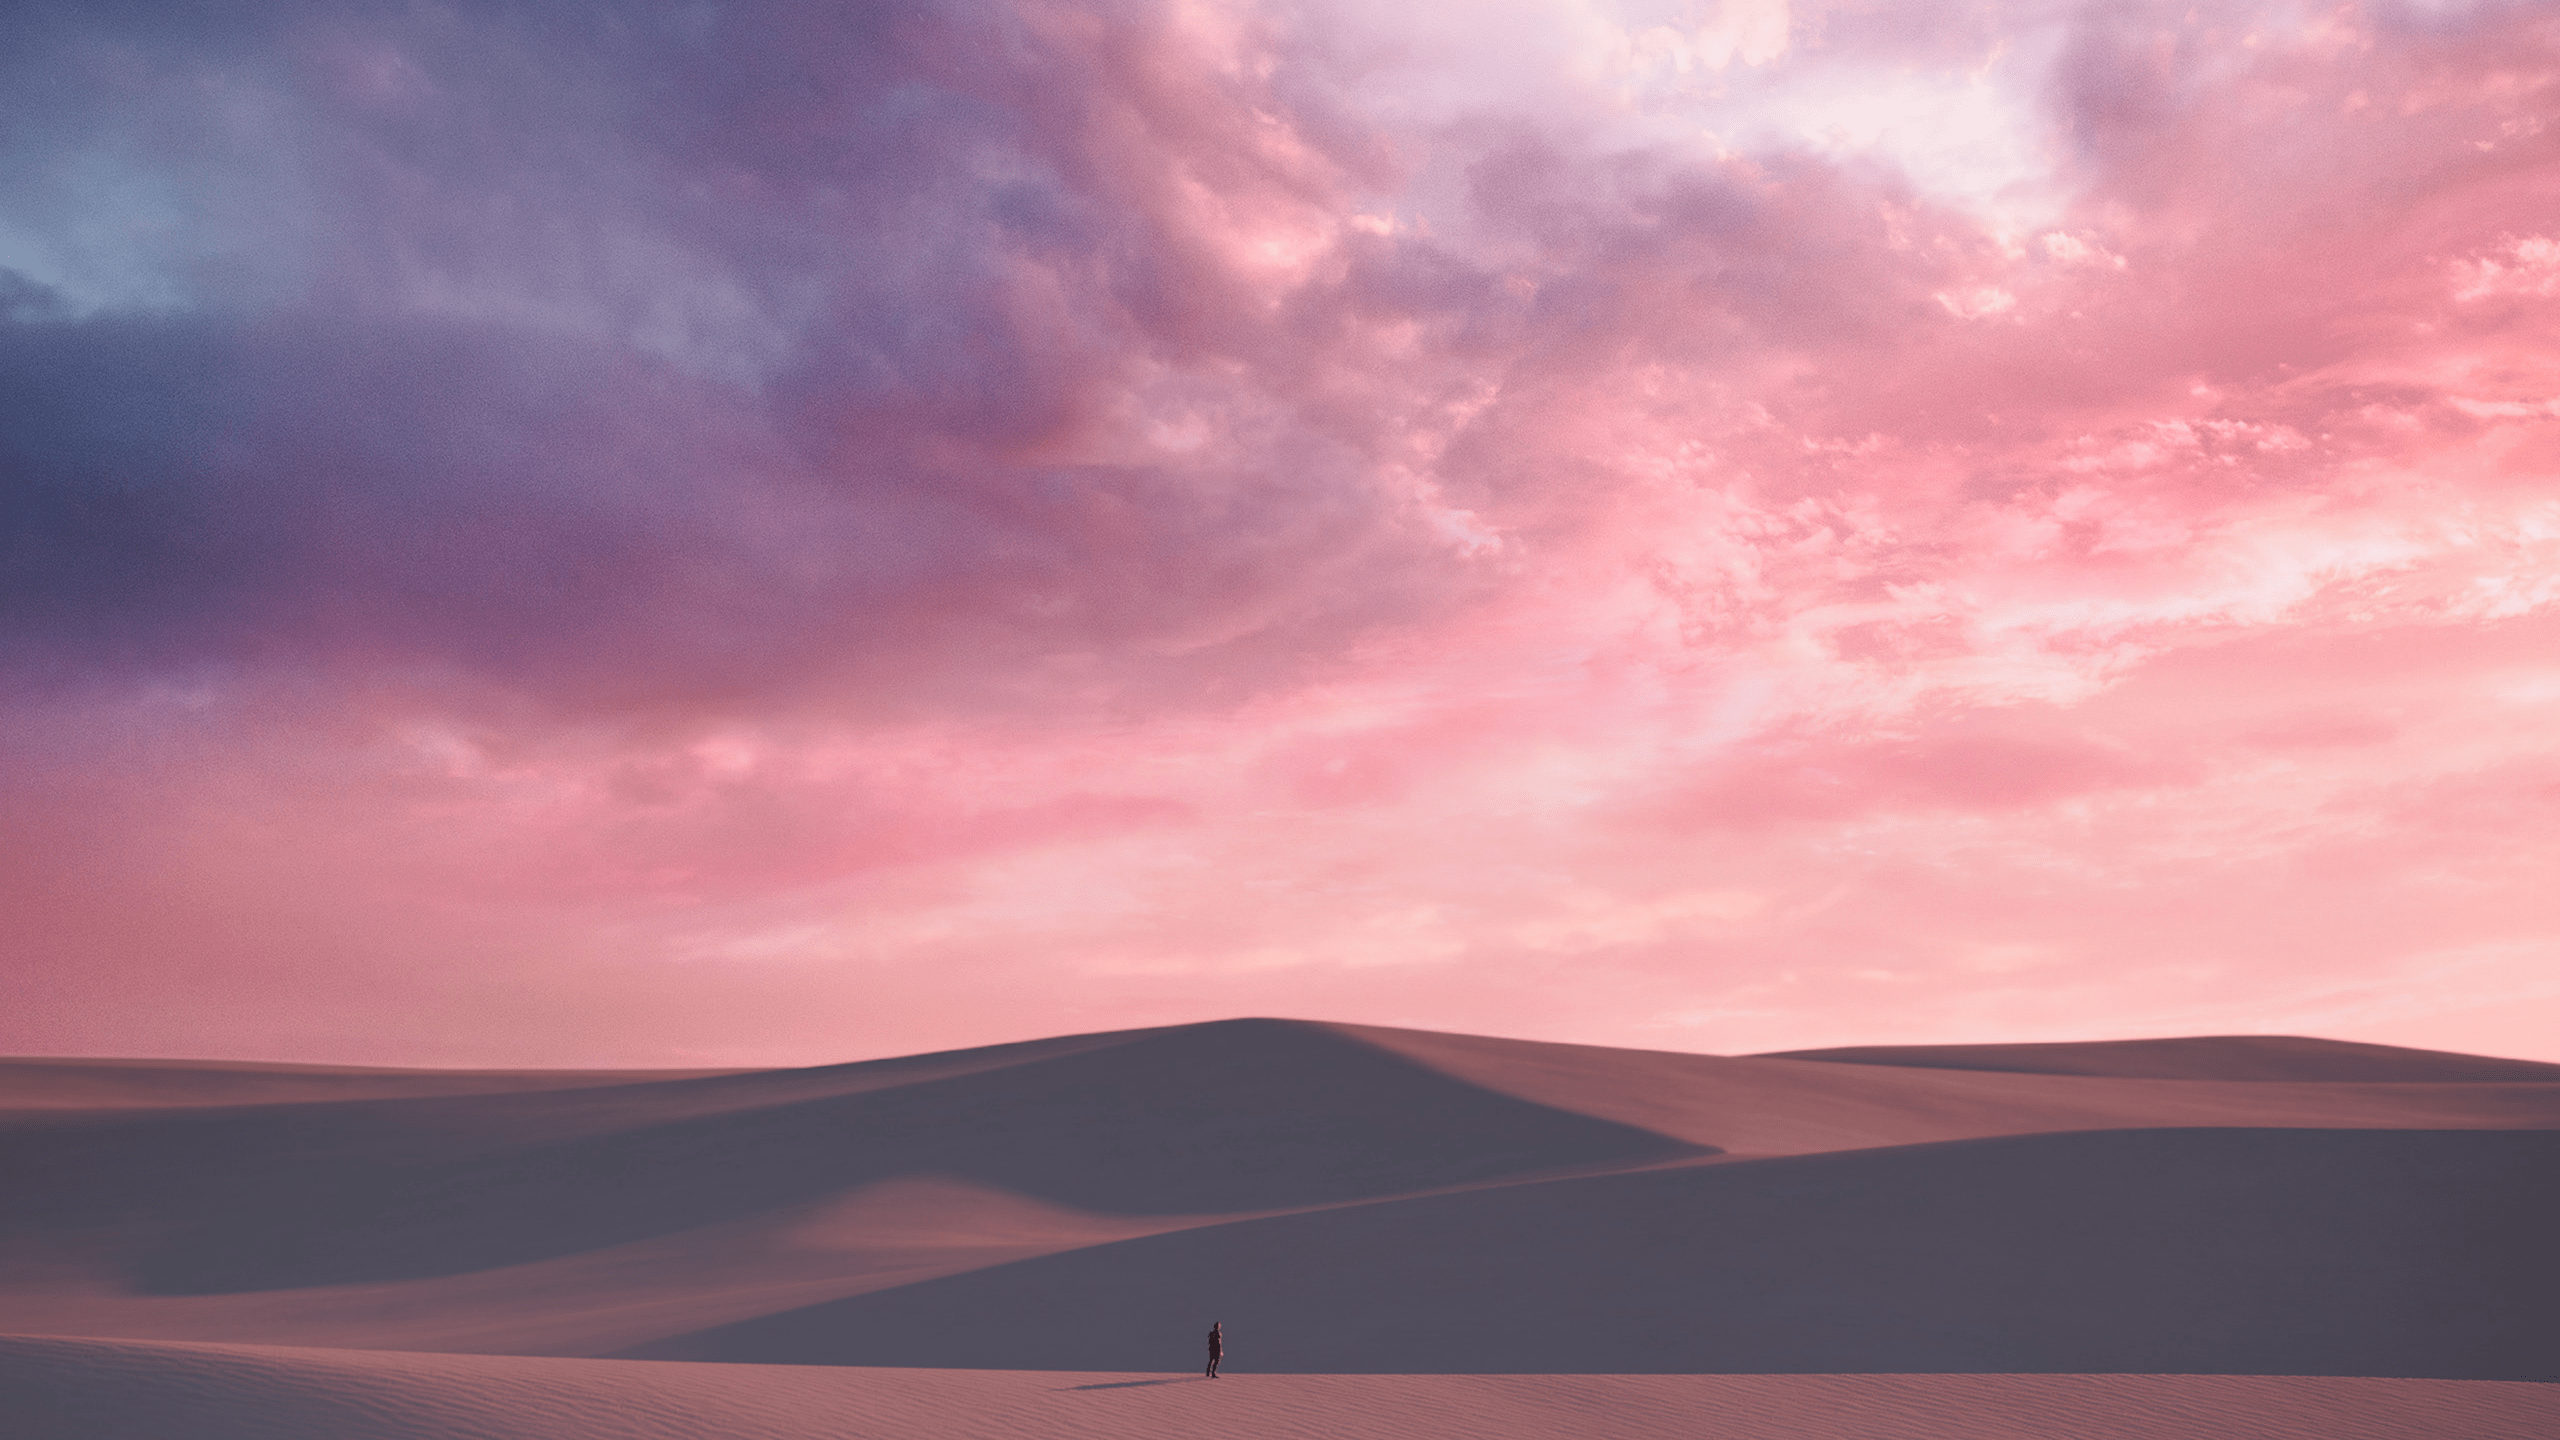 A person standing in a desert with a pink and blue sky above. - Desert